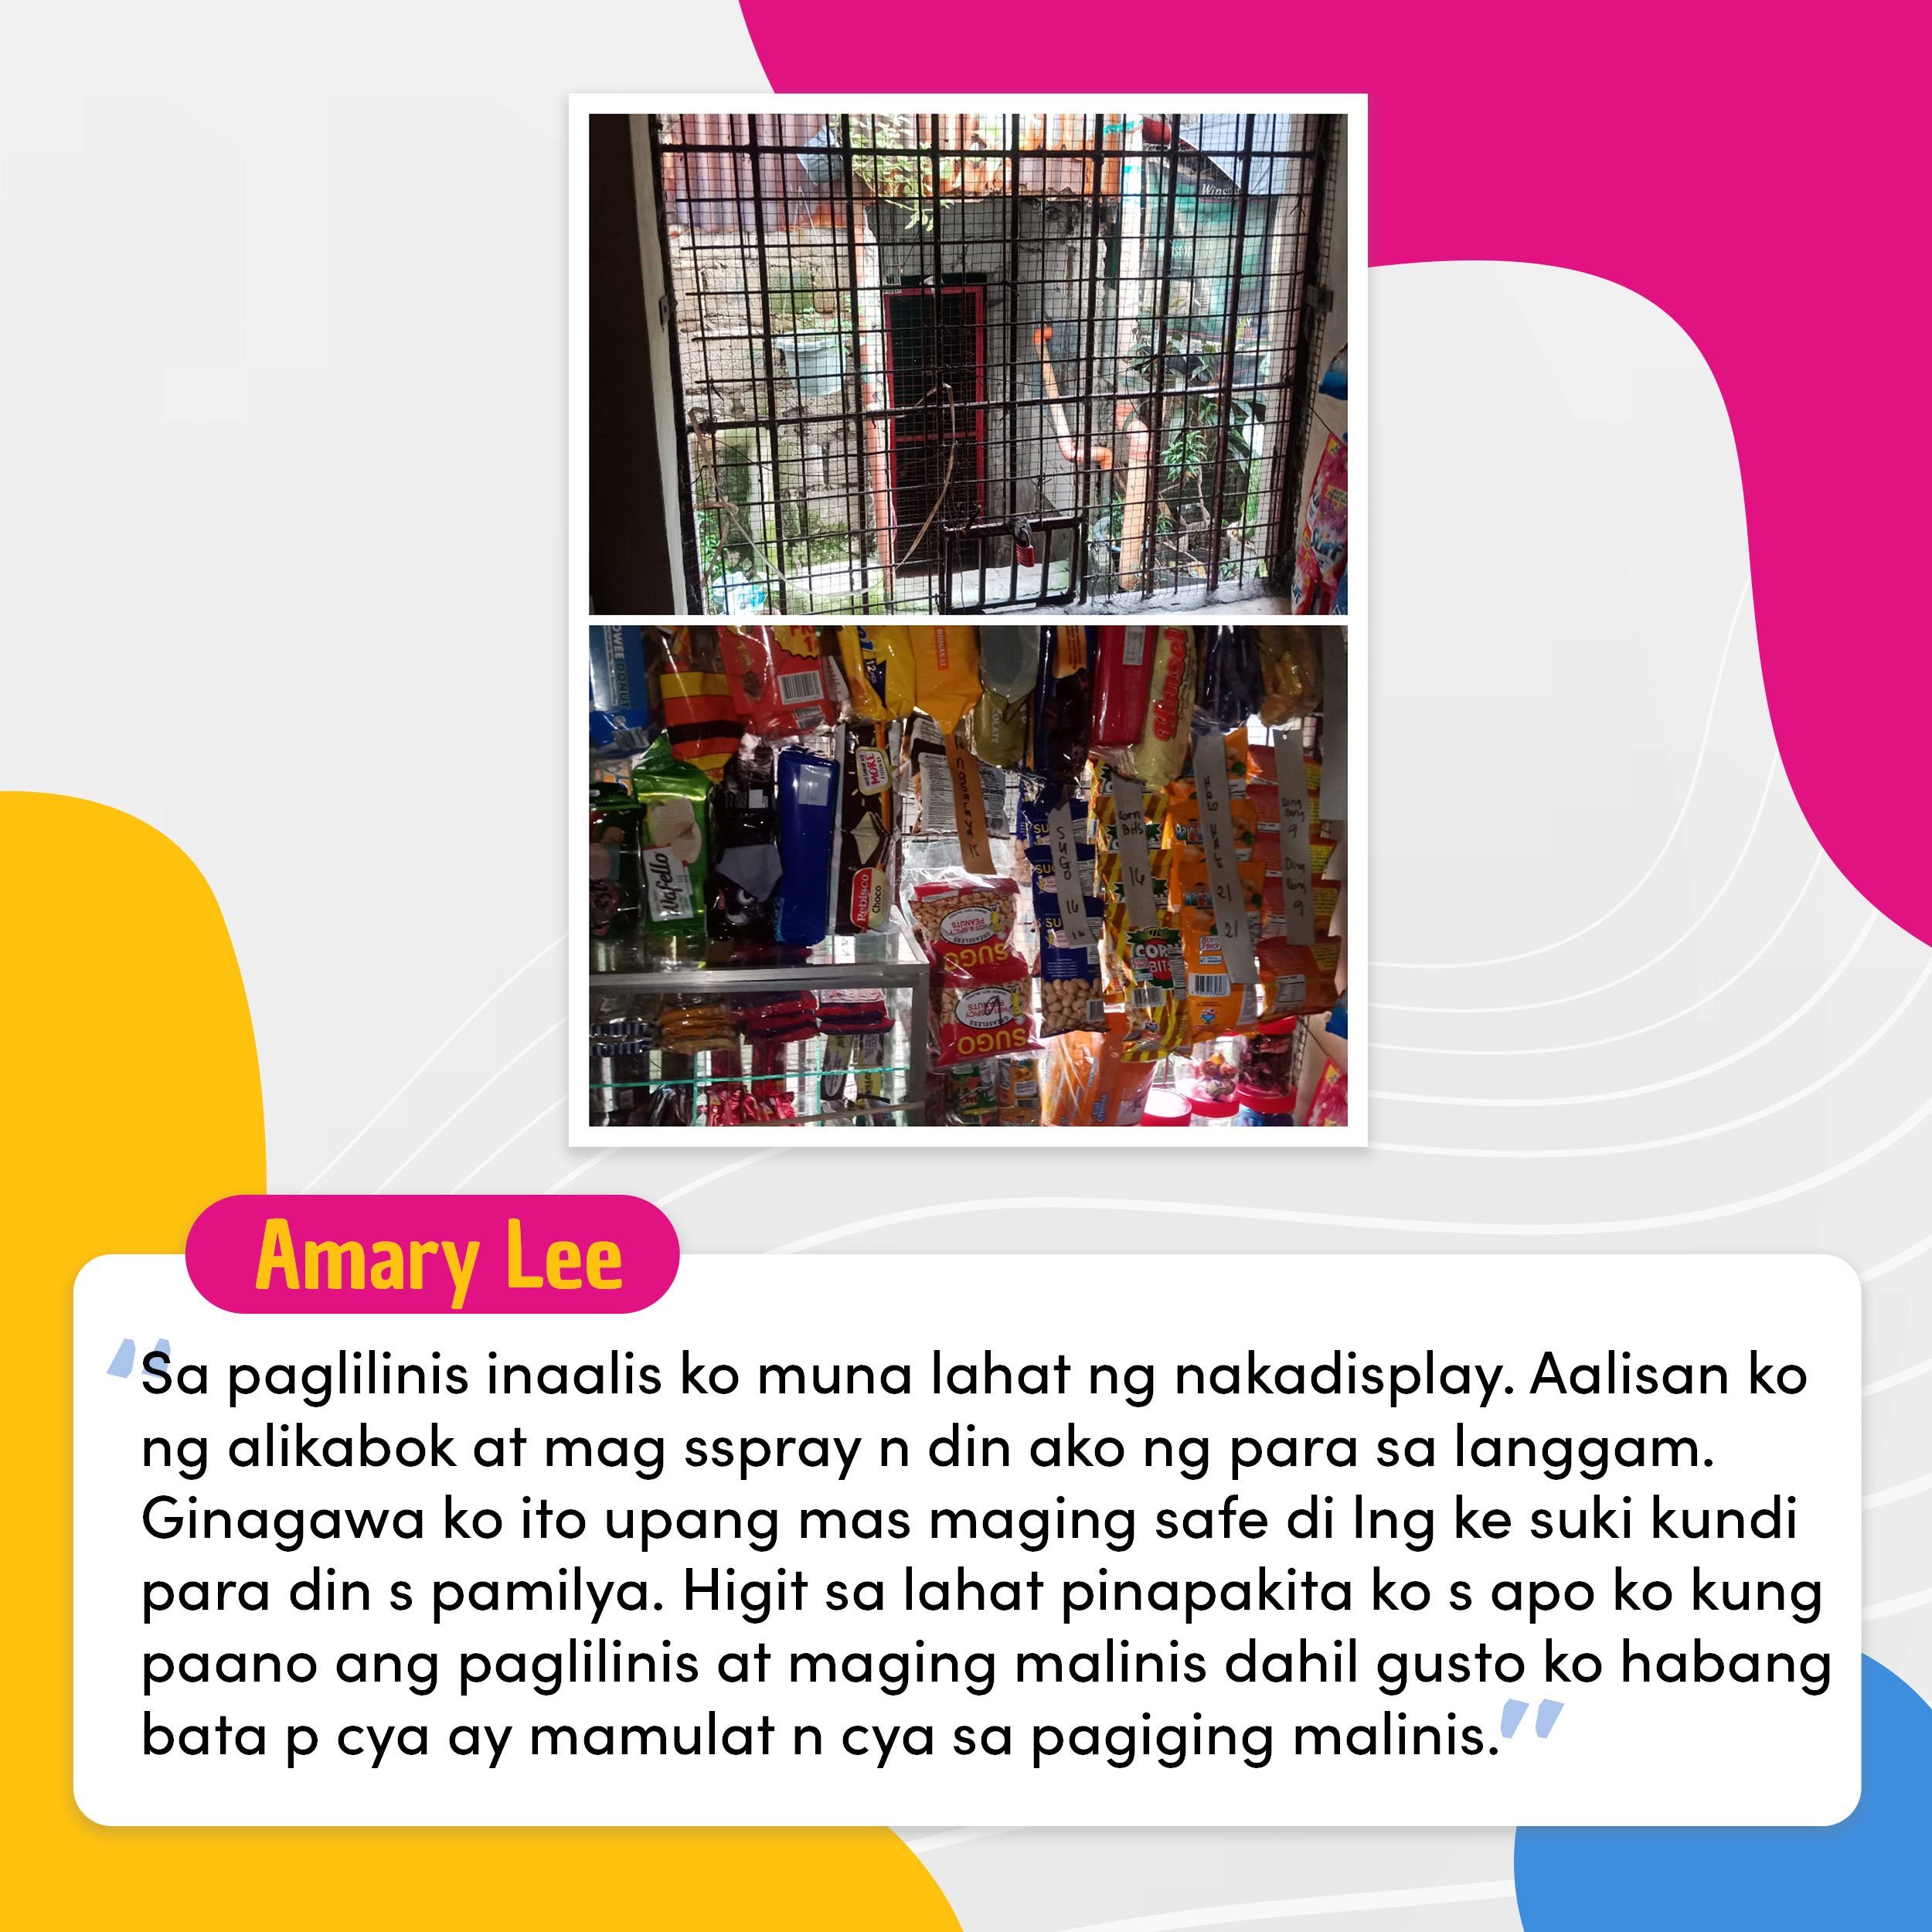 Hapinoy x World Cleanup Day - Campaign Photo Entries - Entry #2 Amary Lee.jpg